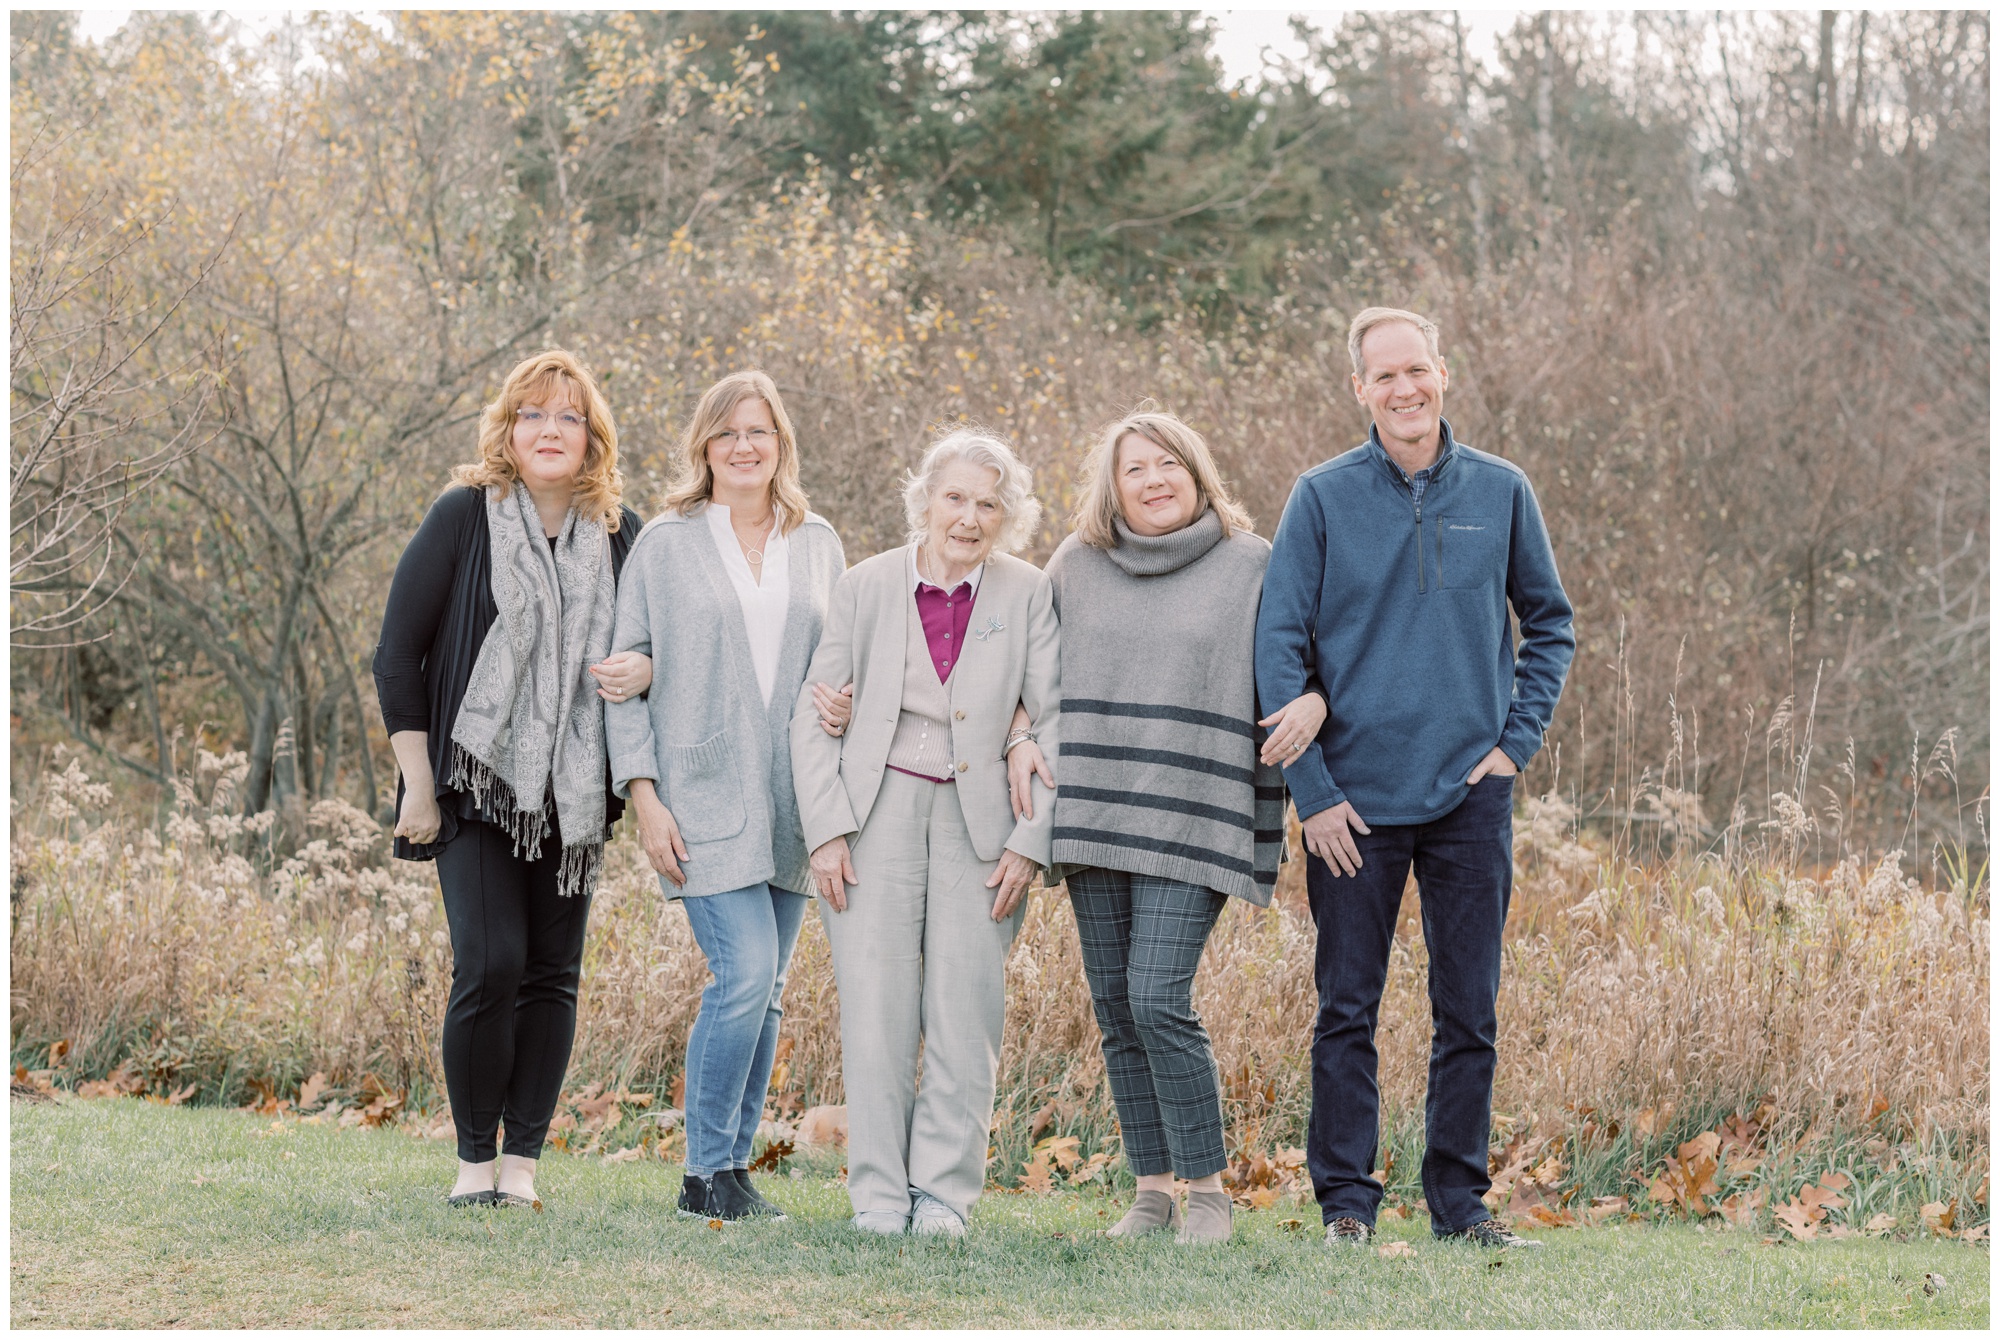 Adult children with their elderly mother smiling during their family portraits in Saratoga springs, NY during the Fall season.
